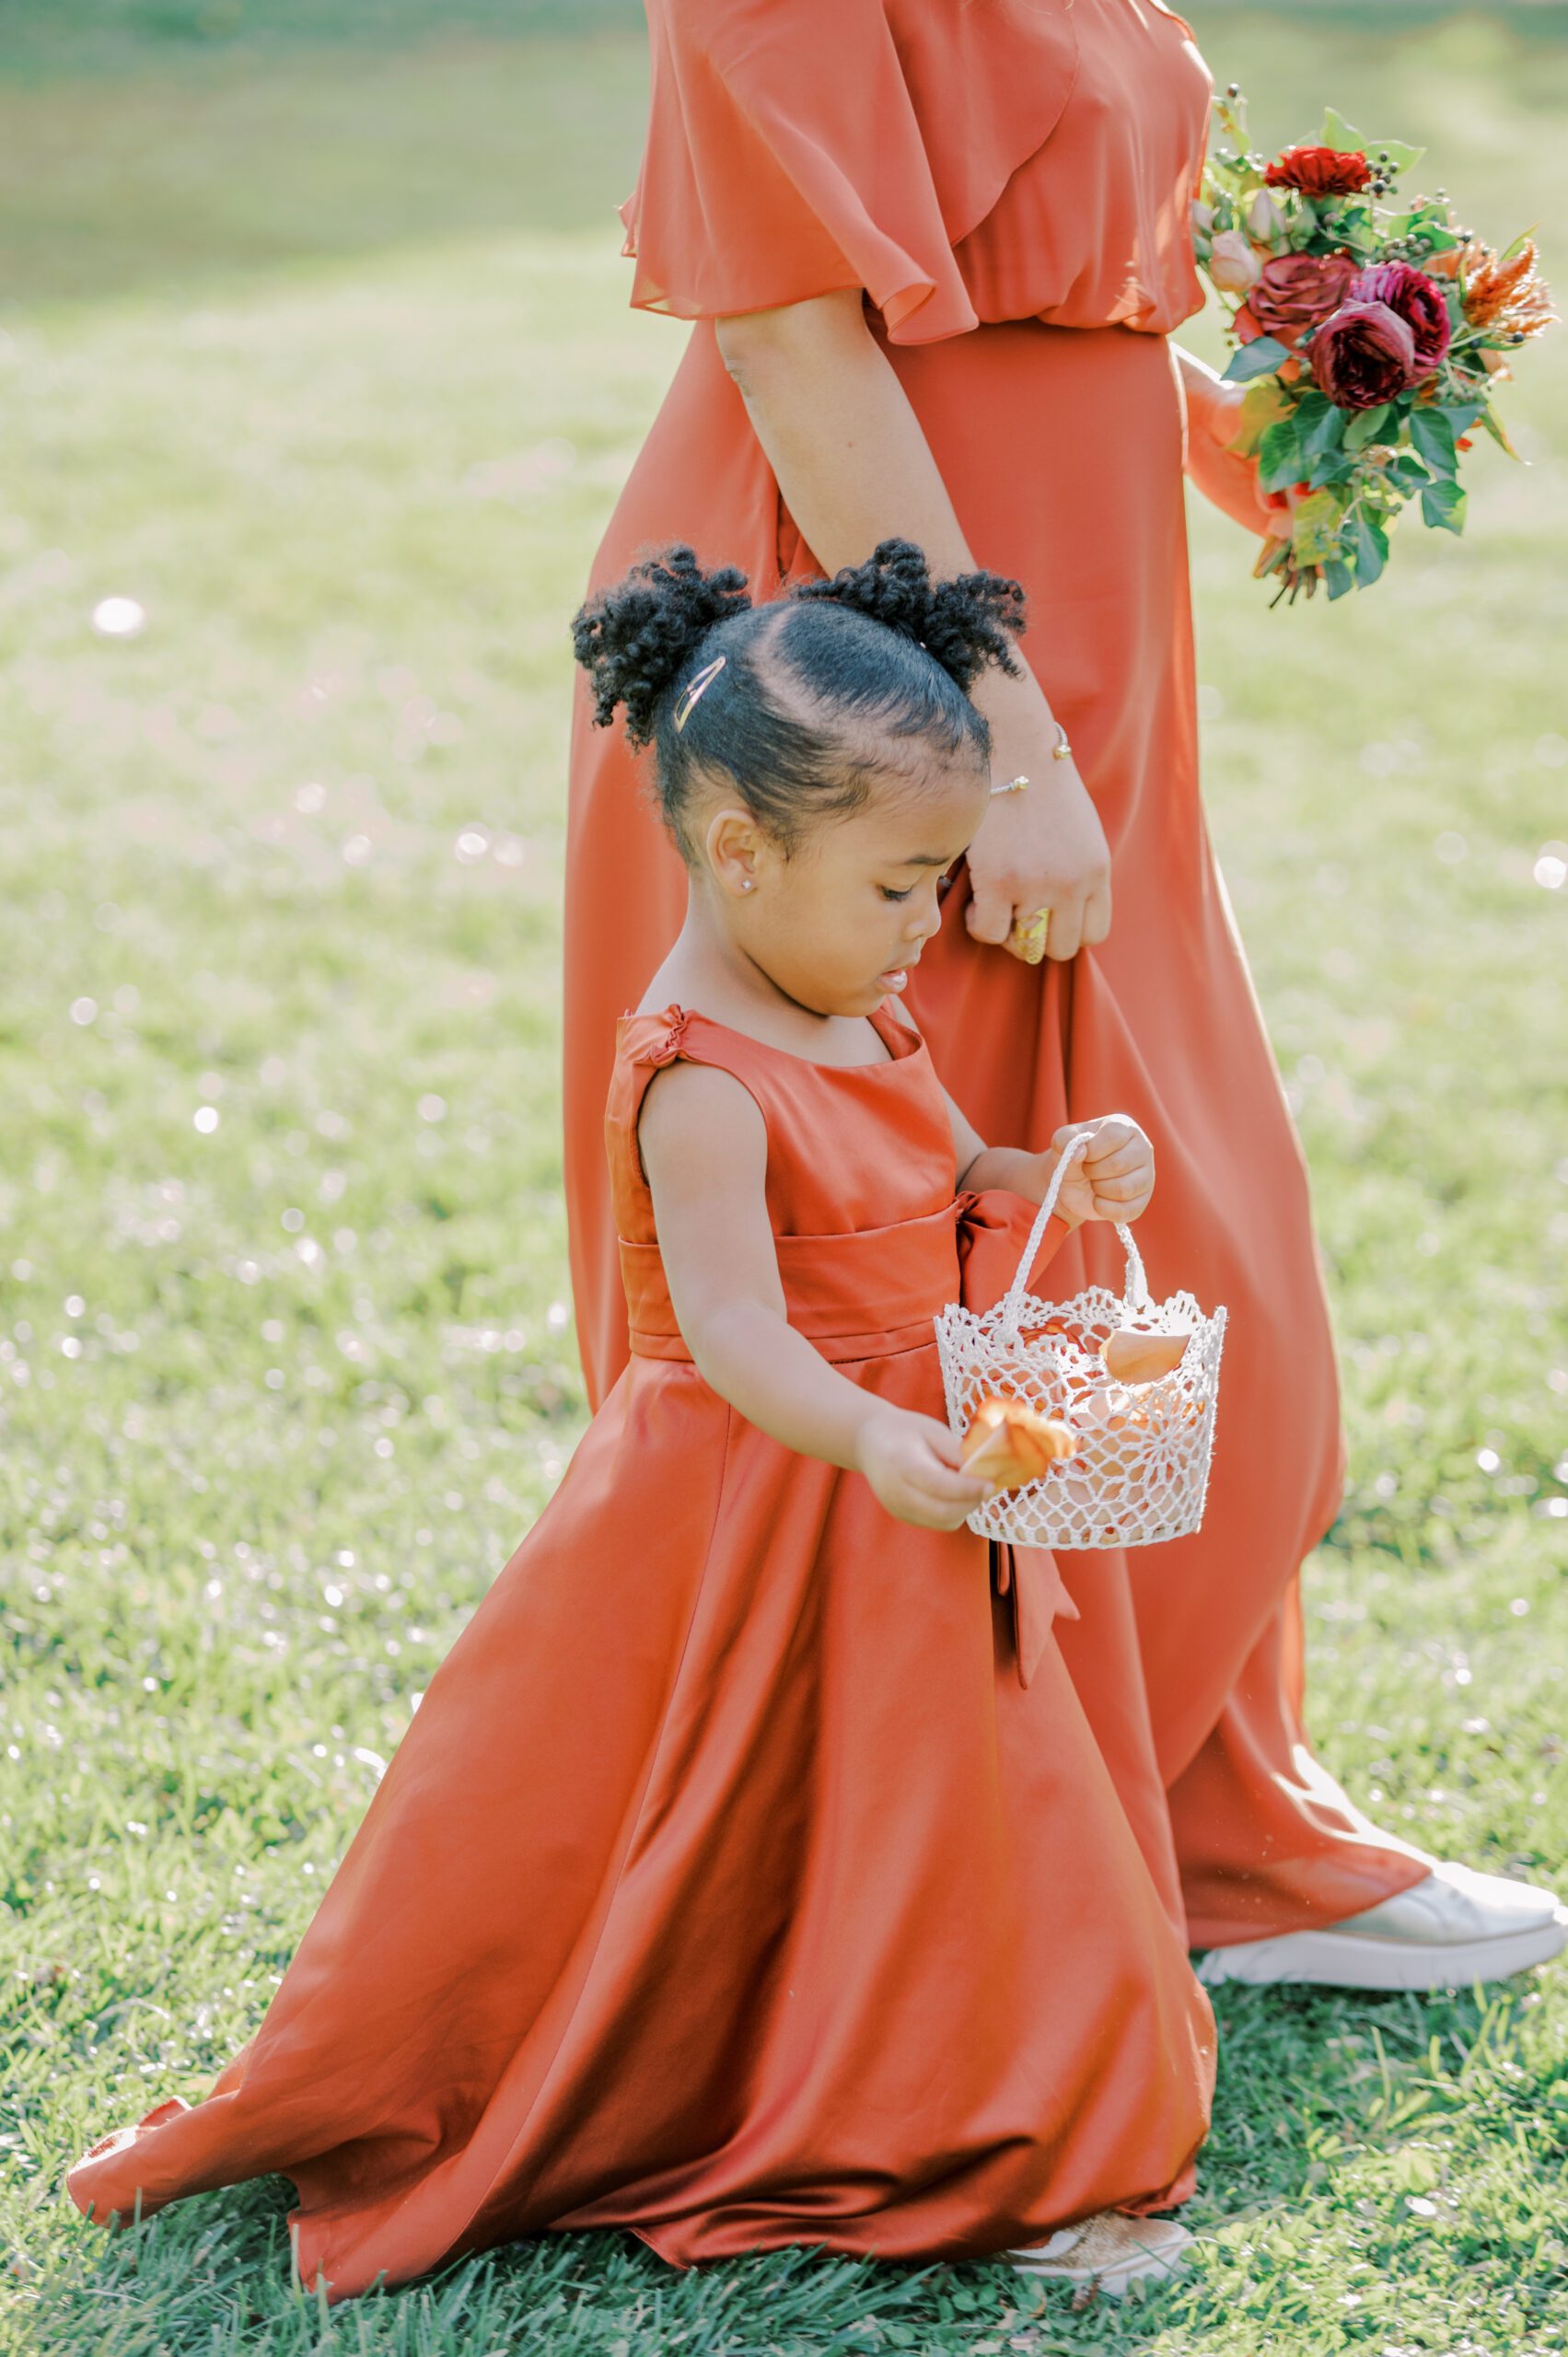 Image of young girl in orange dress tossing flower petals as she walks down the aisle alongside a bridesmaid in an orange dress